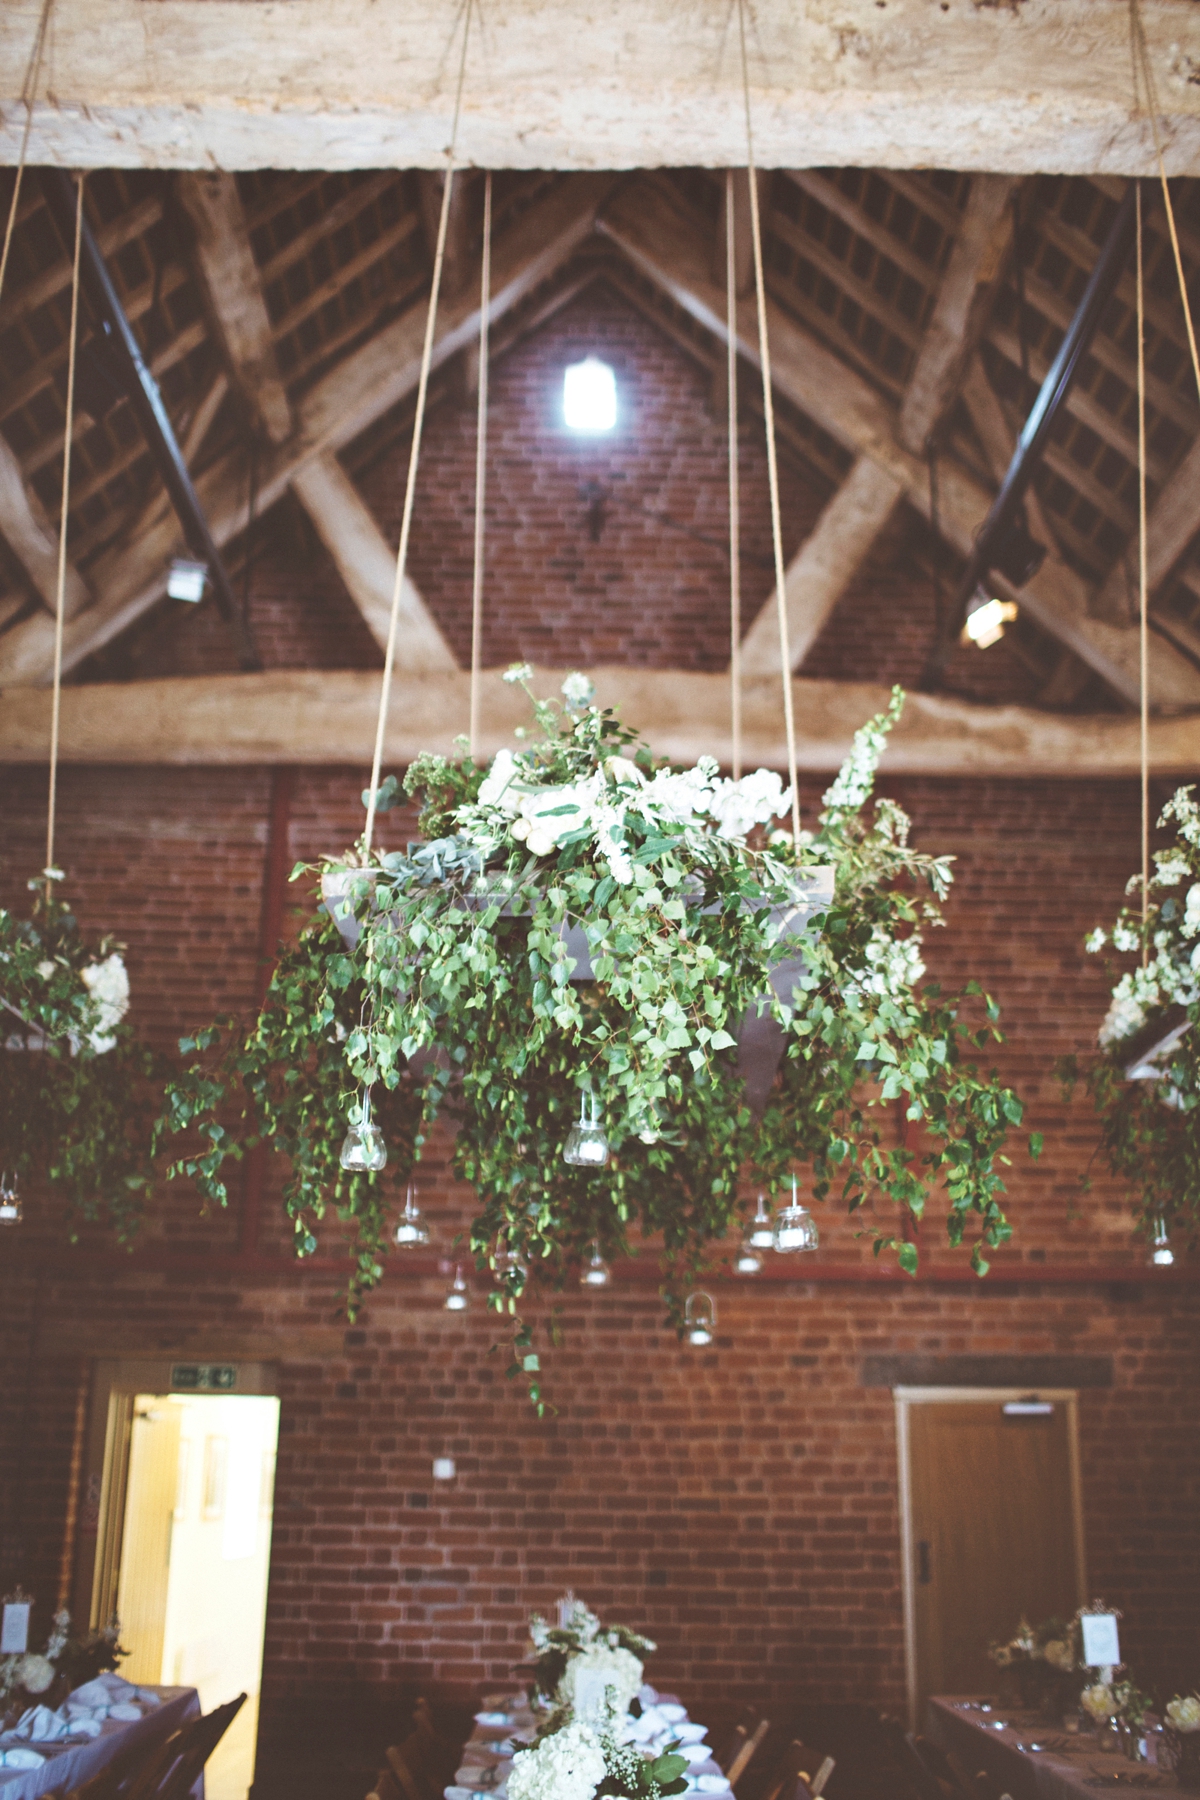 47 A Flora bride dress for a natural and rustic barn wedding in Shropshire